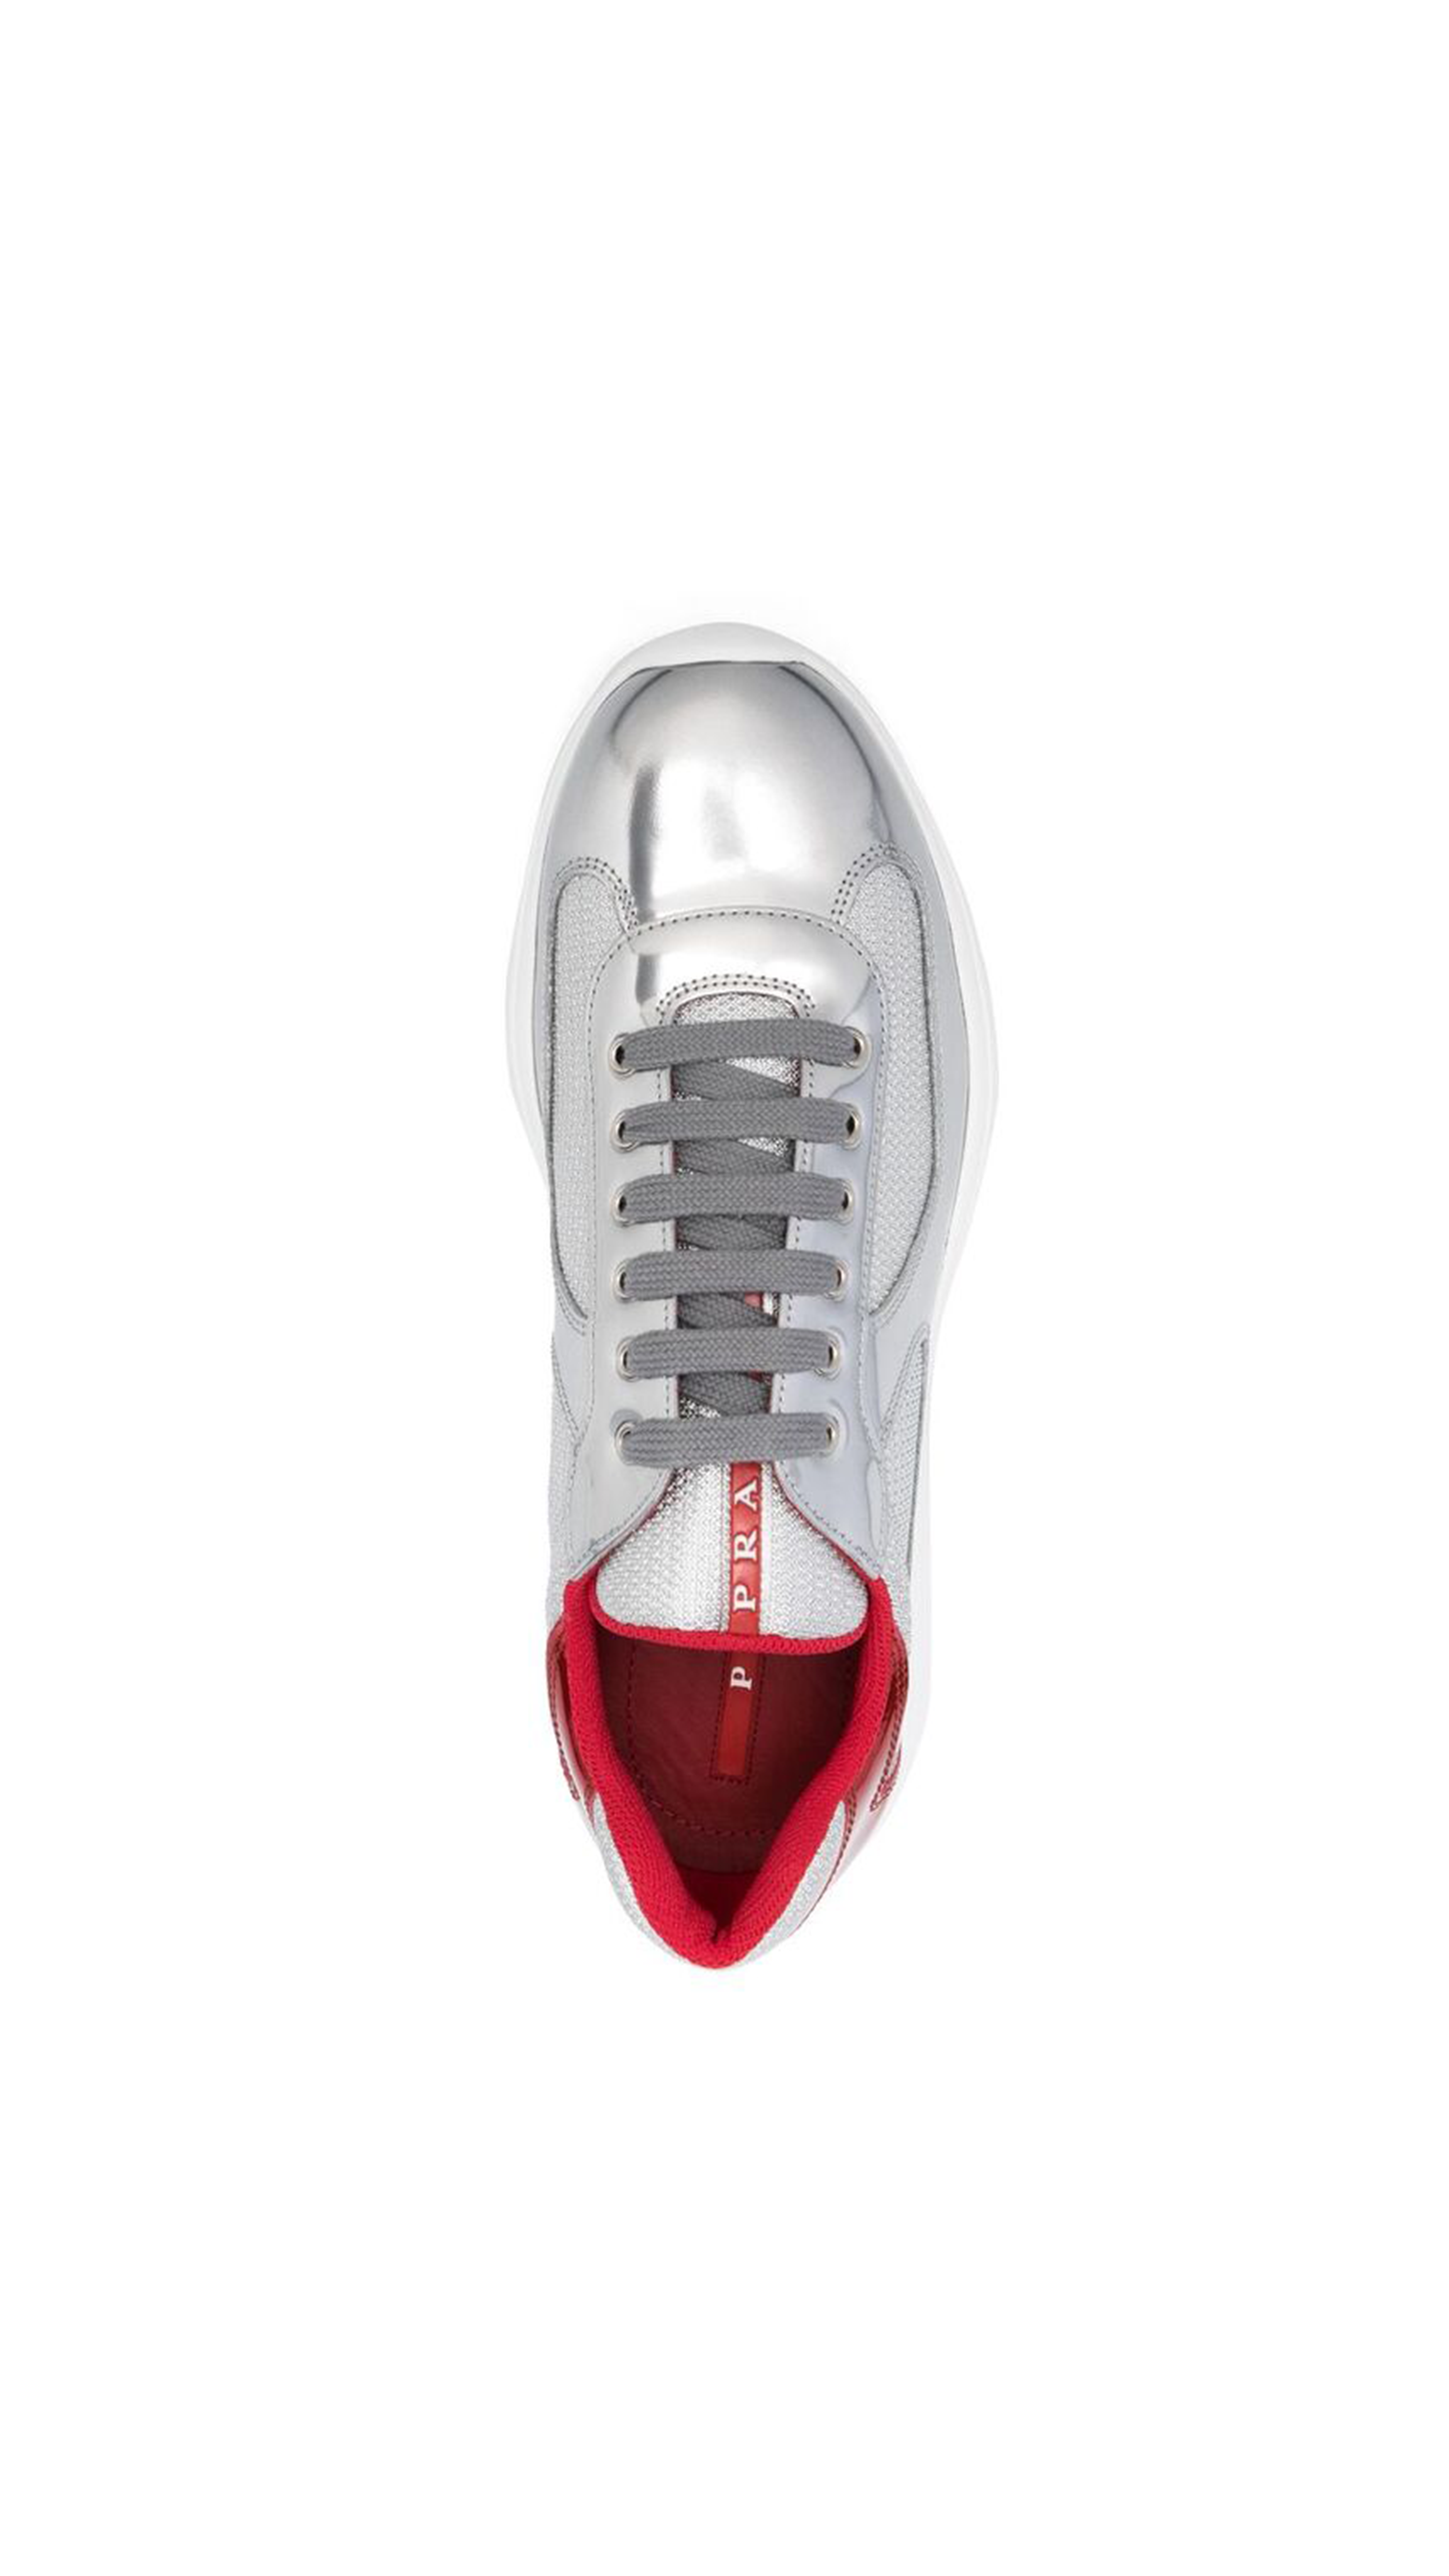 America's Cup Sneakers in Metallic Leather and Technical Fabric - Silver/Red